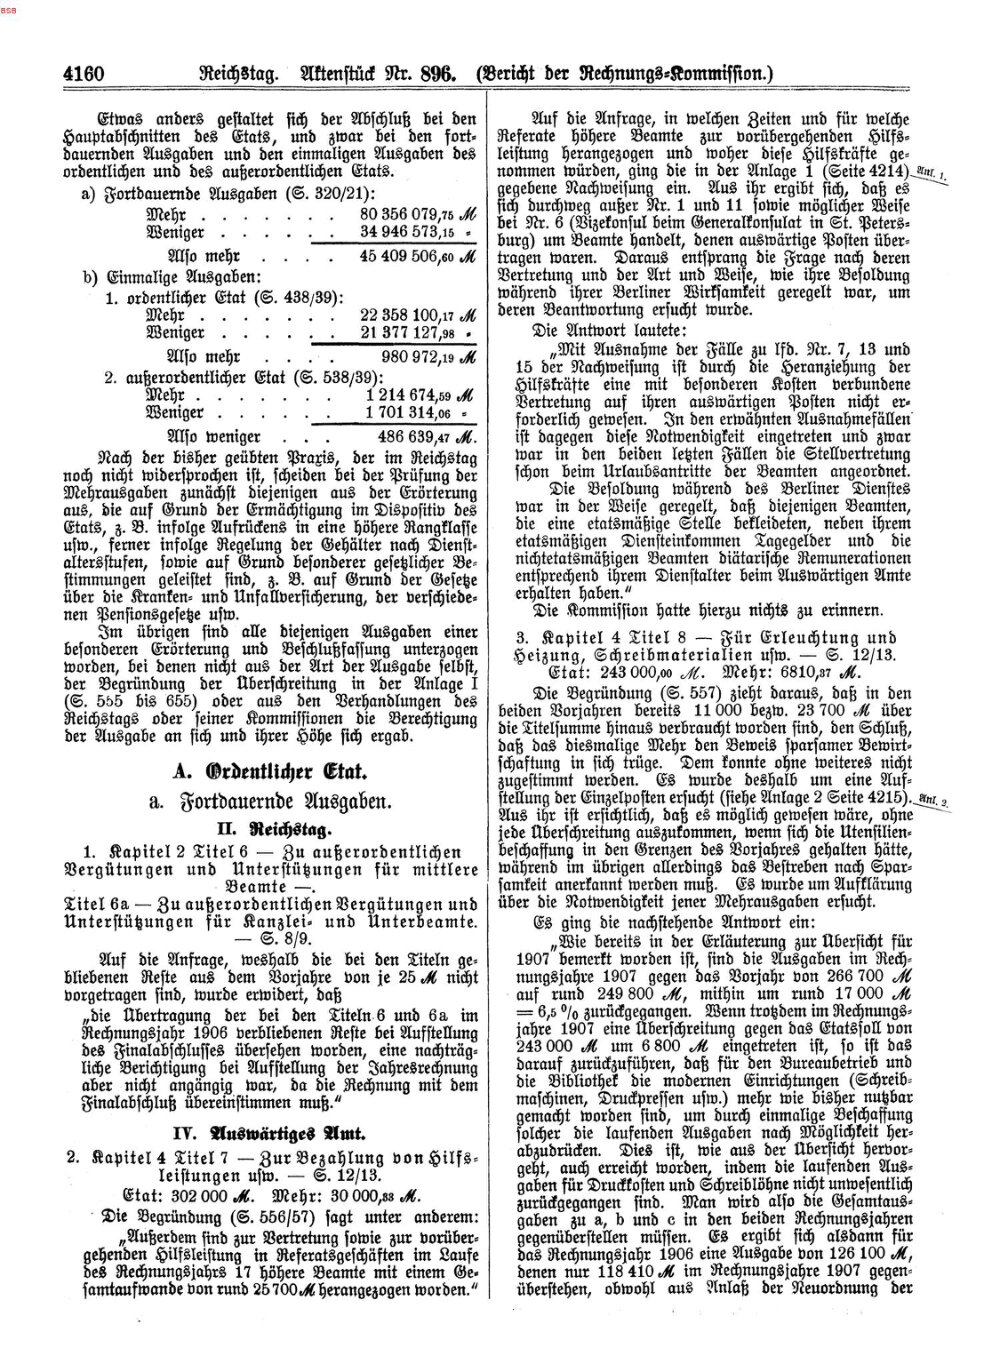 Scan of page 4160